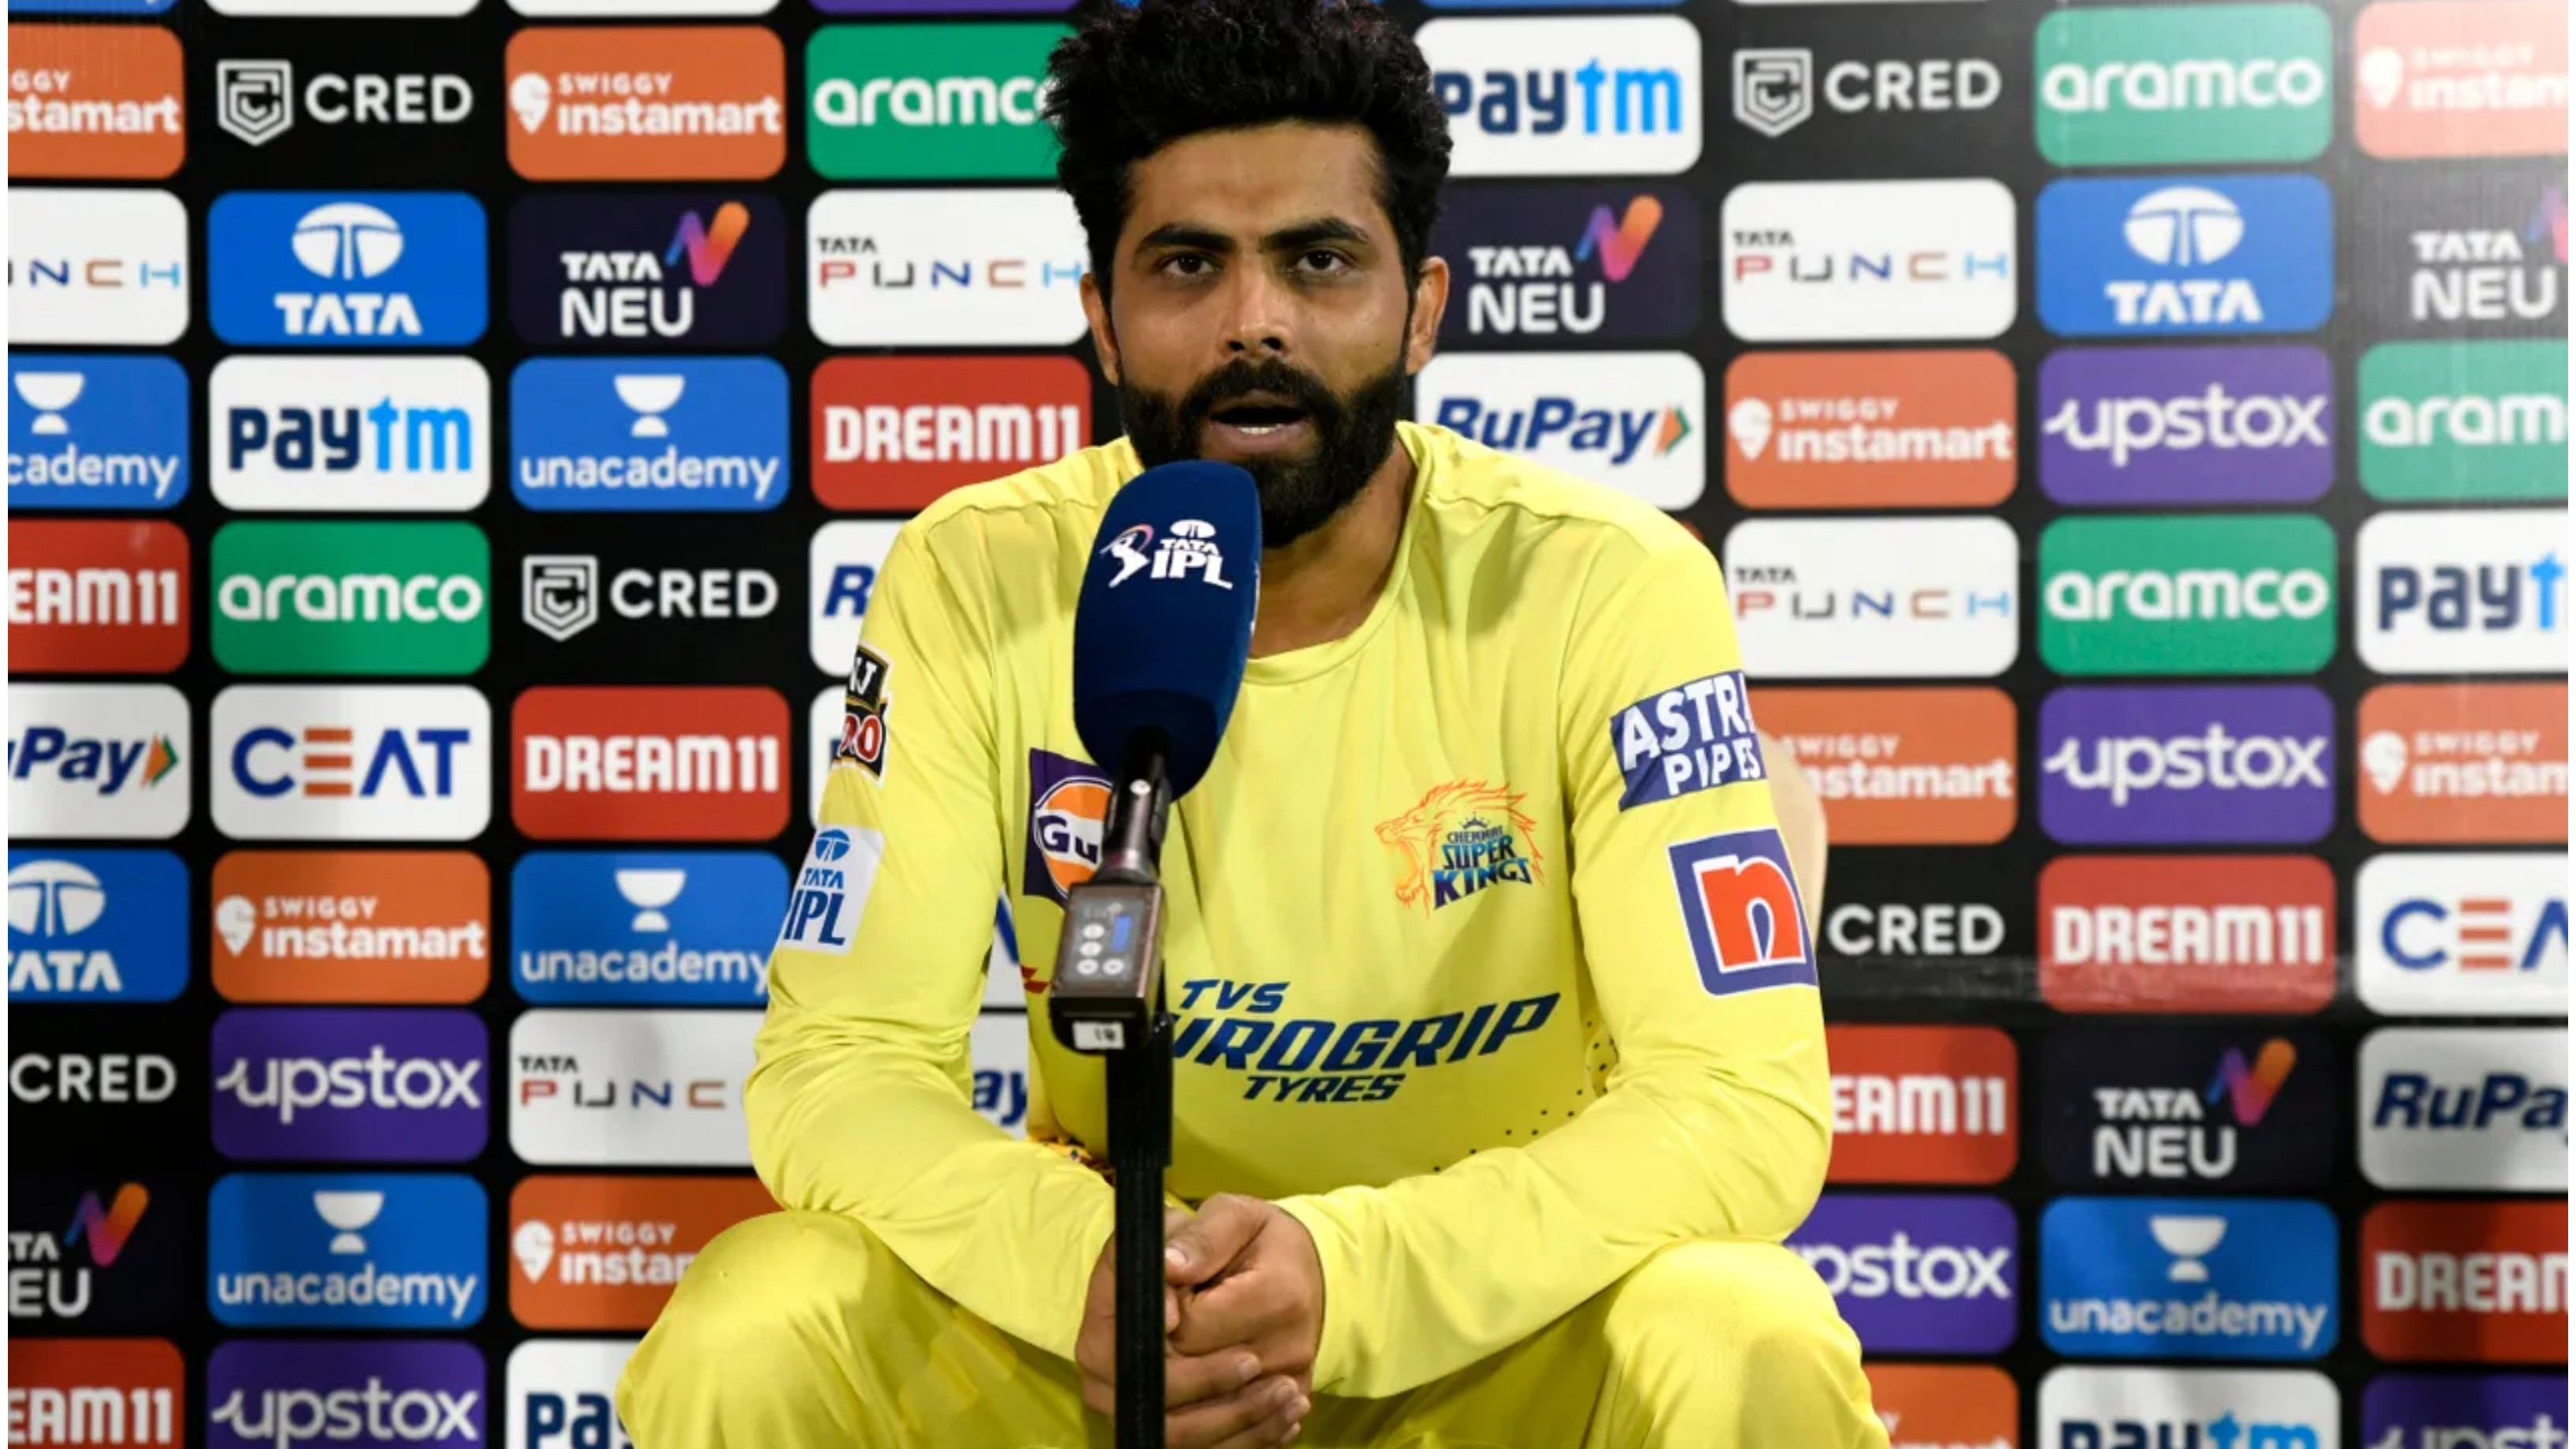 IPL 2022: “One win will put us on the right track”, says Jadeja ahead of CSK’s match against SRH